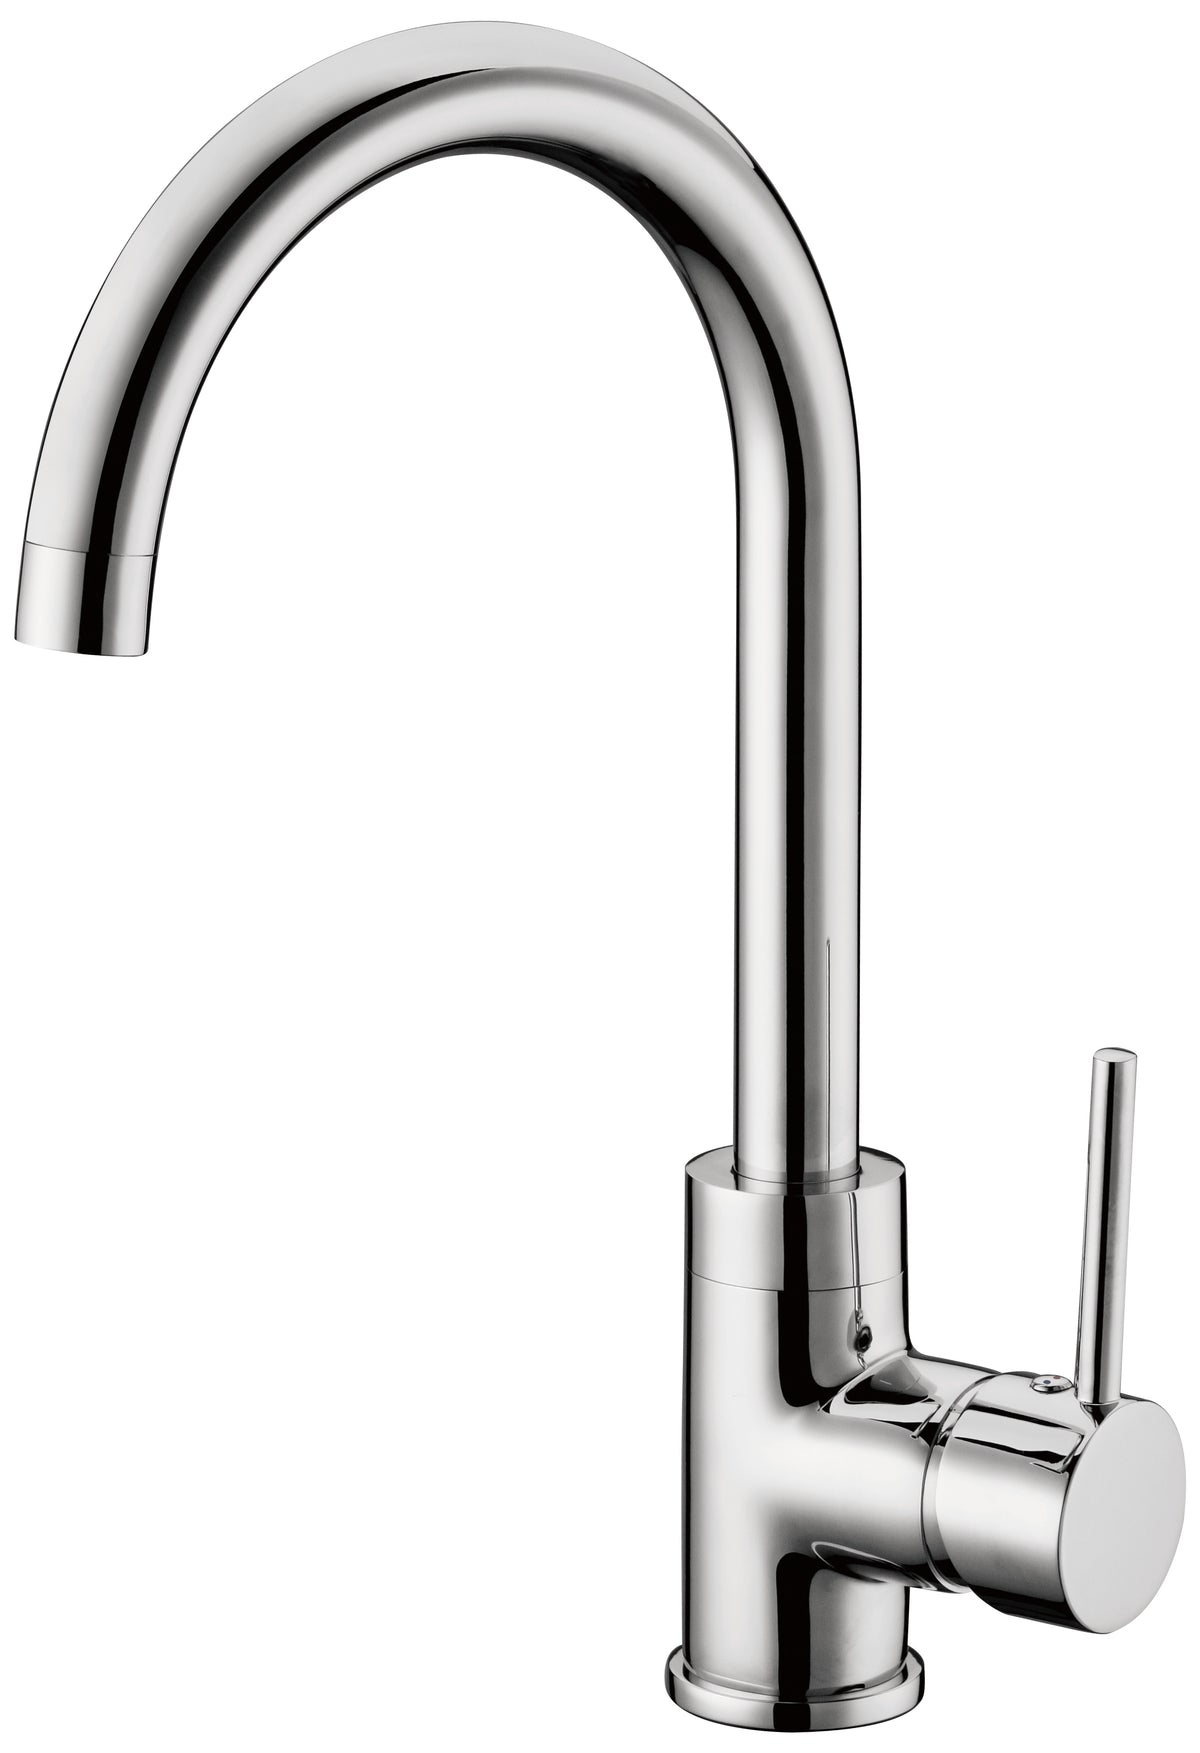 Imperial Luxury Basin Faucet - Silver